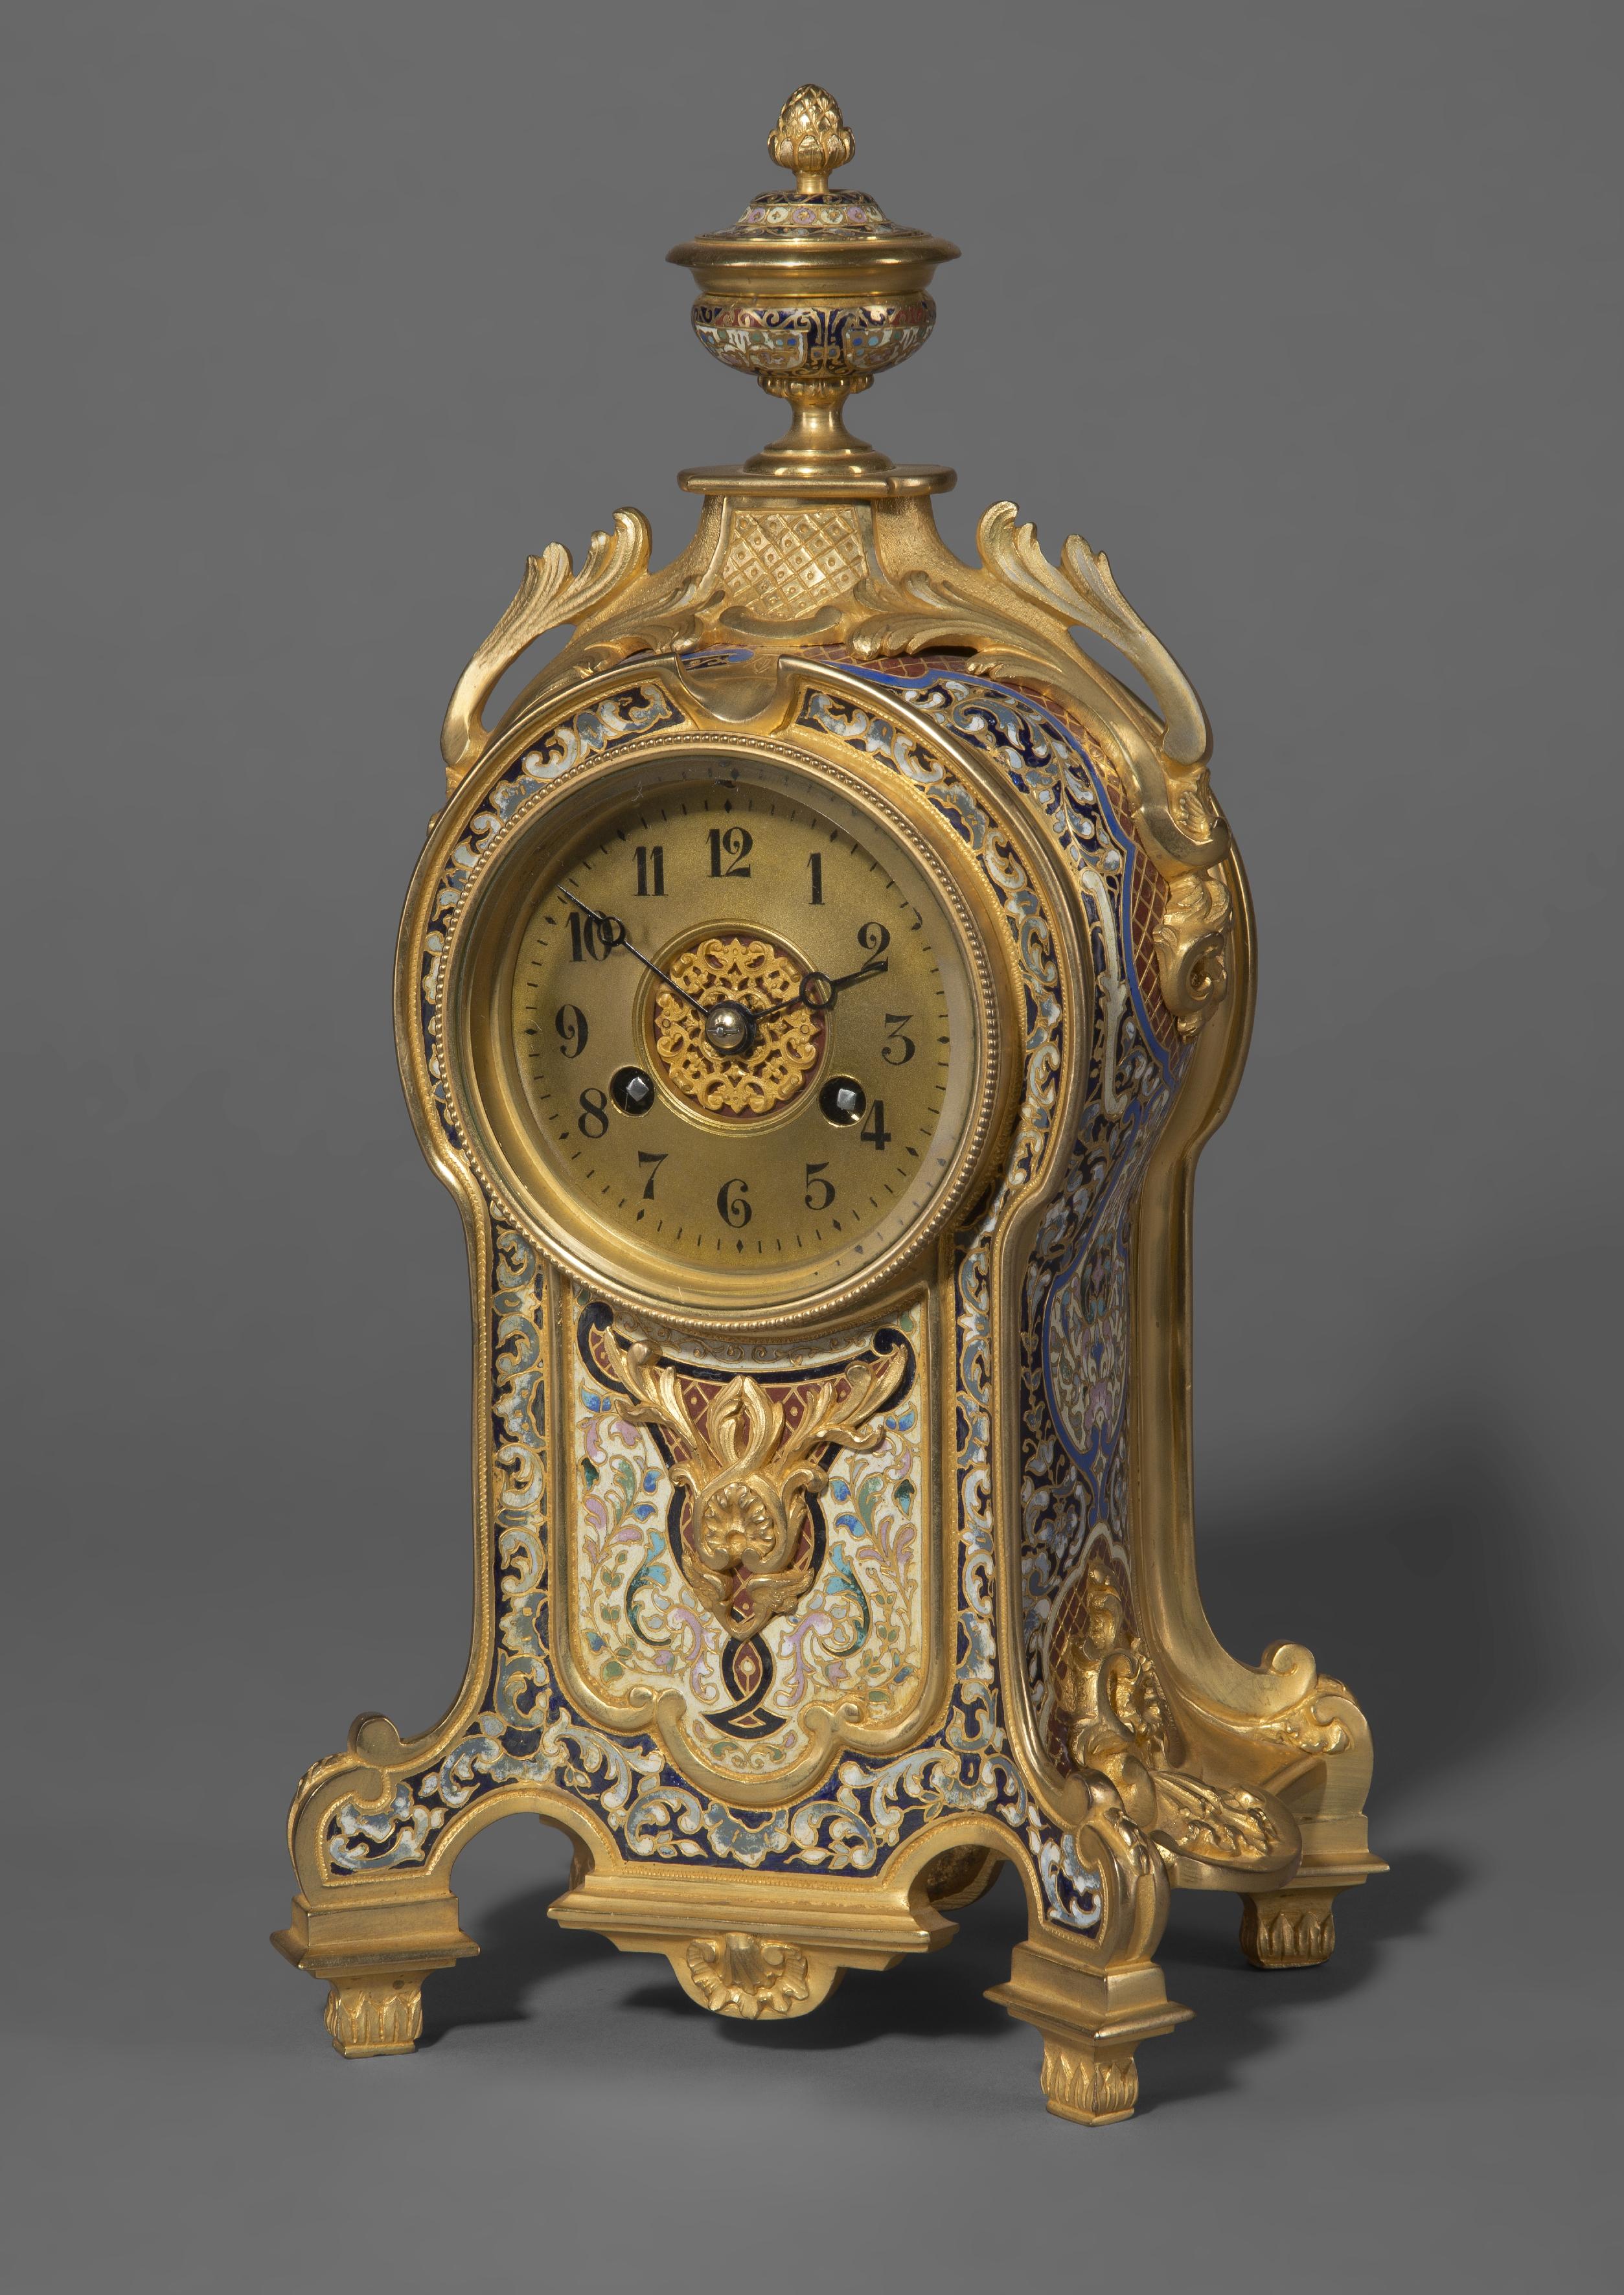 A fine gilt bronze and champlevé enamel clock.

French, circa 1880.

The movement with impressed stamp to the backplate 'Vincenti et Cie 'Médaille D'Argent 1855', 'PARIS'.

This fine clock has a gilt bronze case decorated all-over with